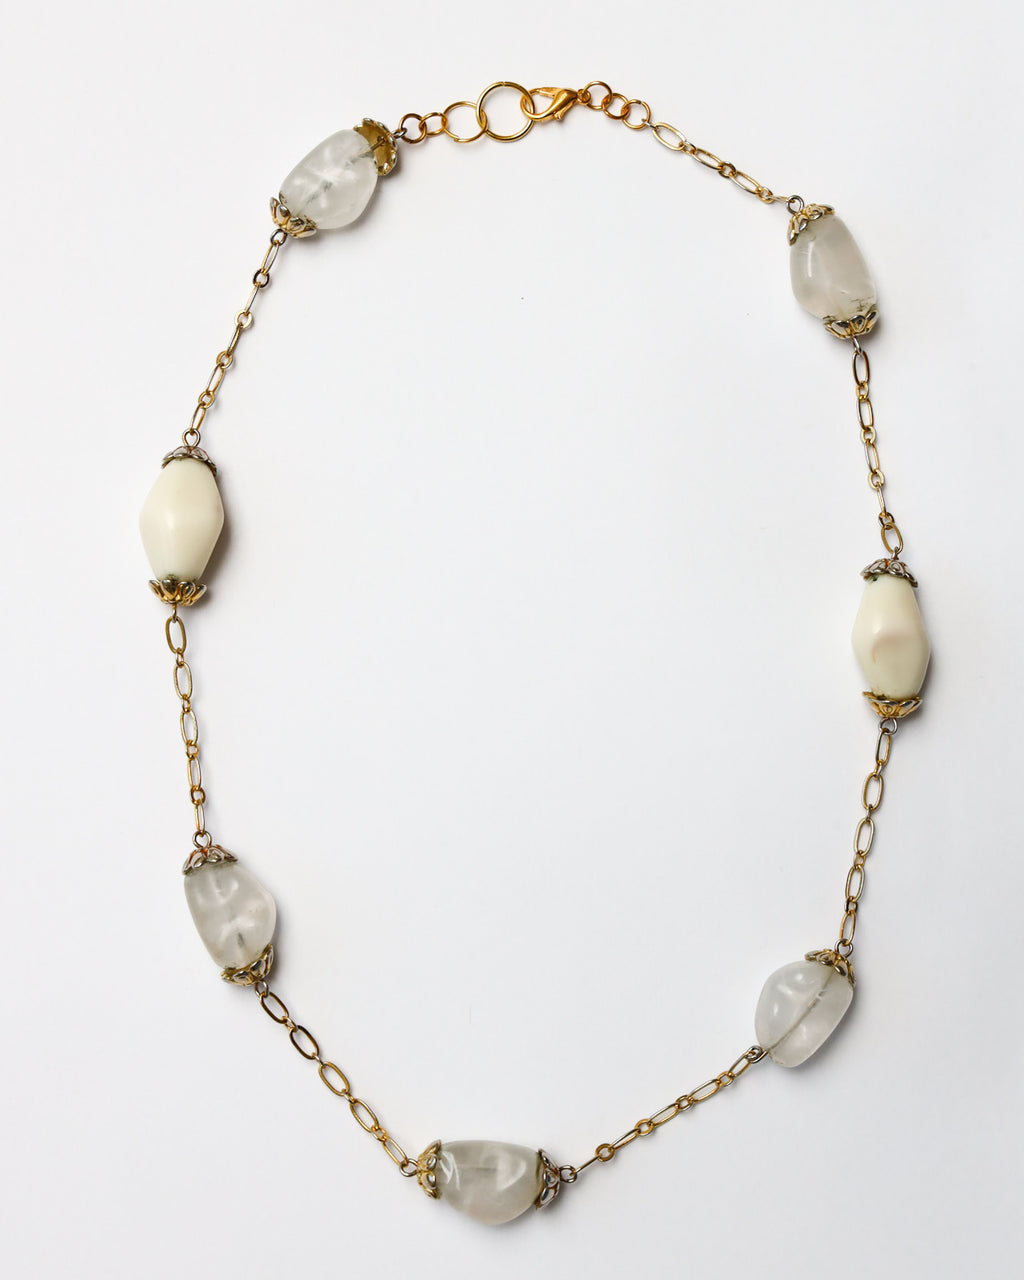 Mixed shape beads strung on gold chain. Full necklace laying on solid white background.